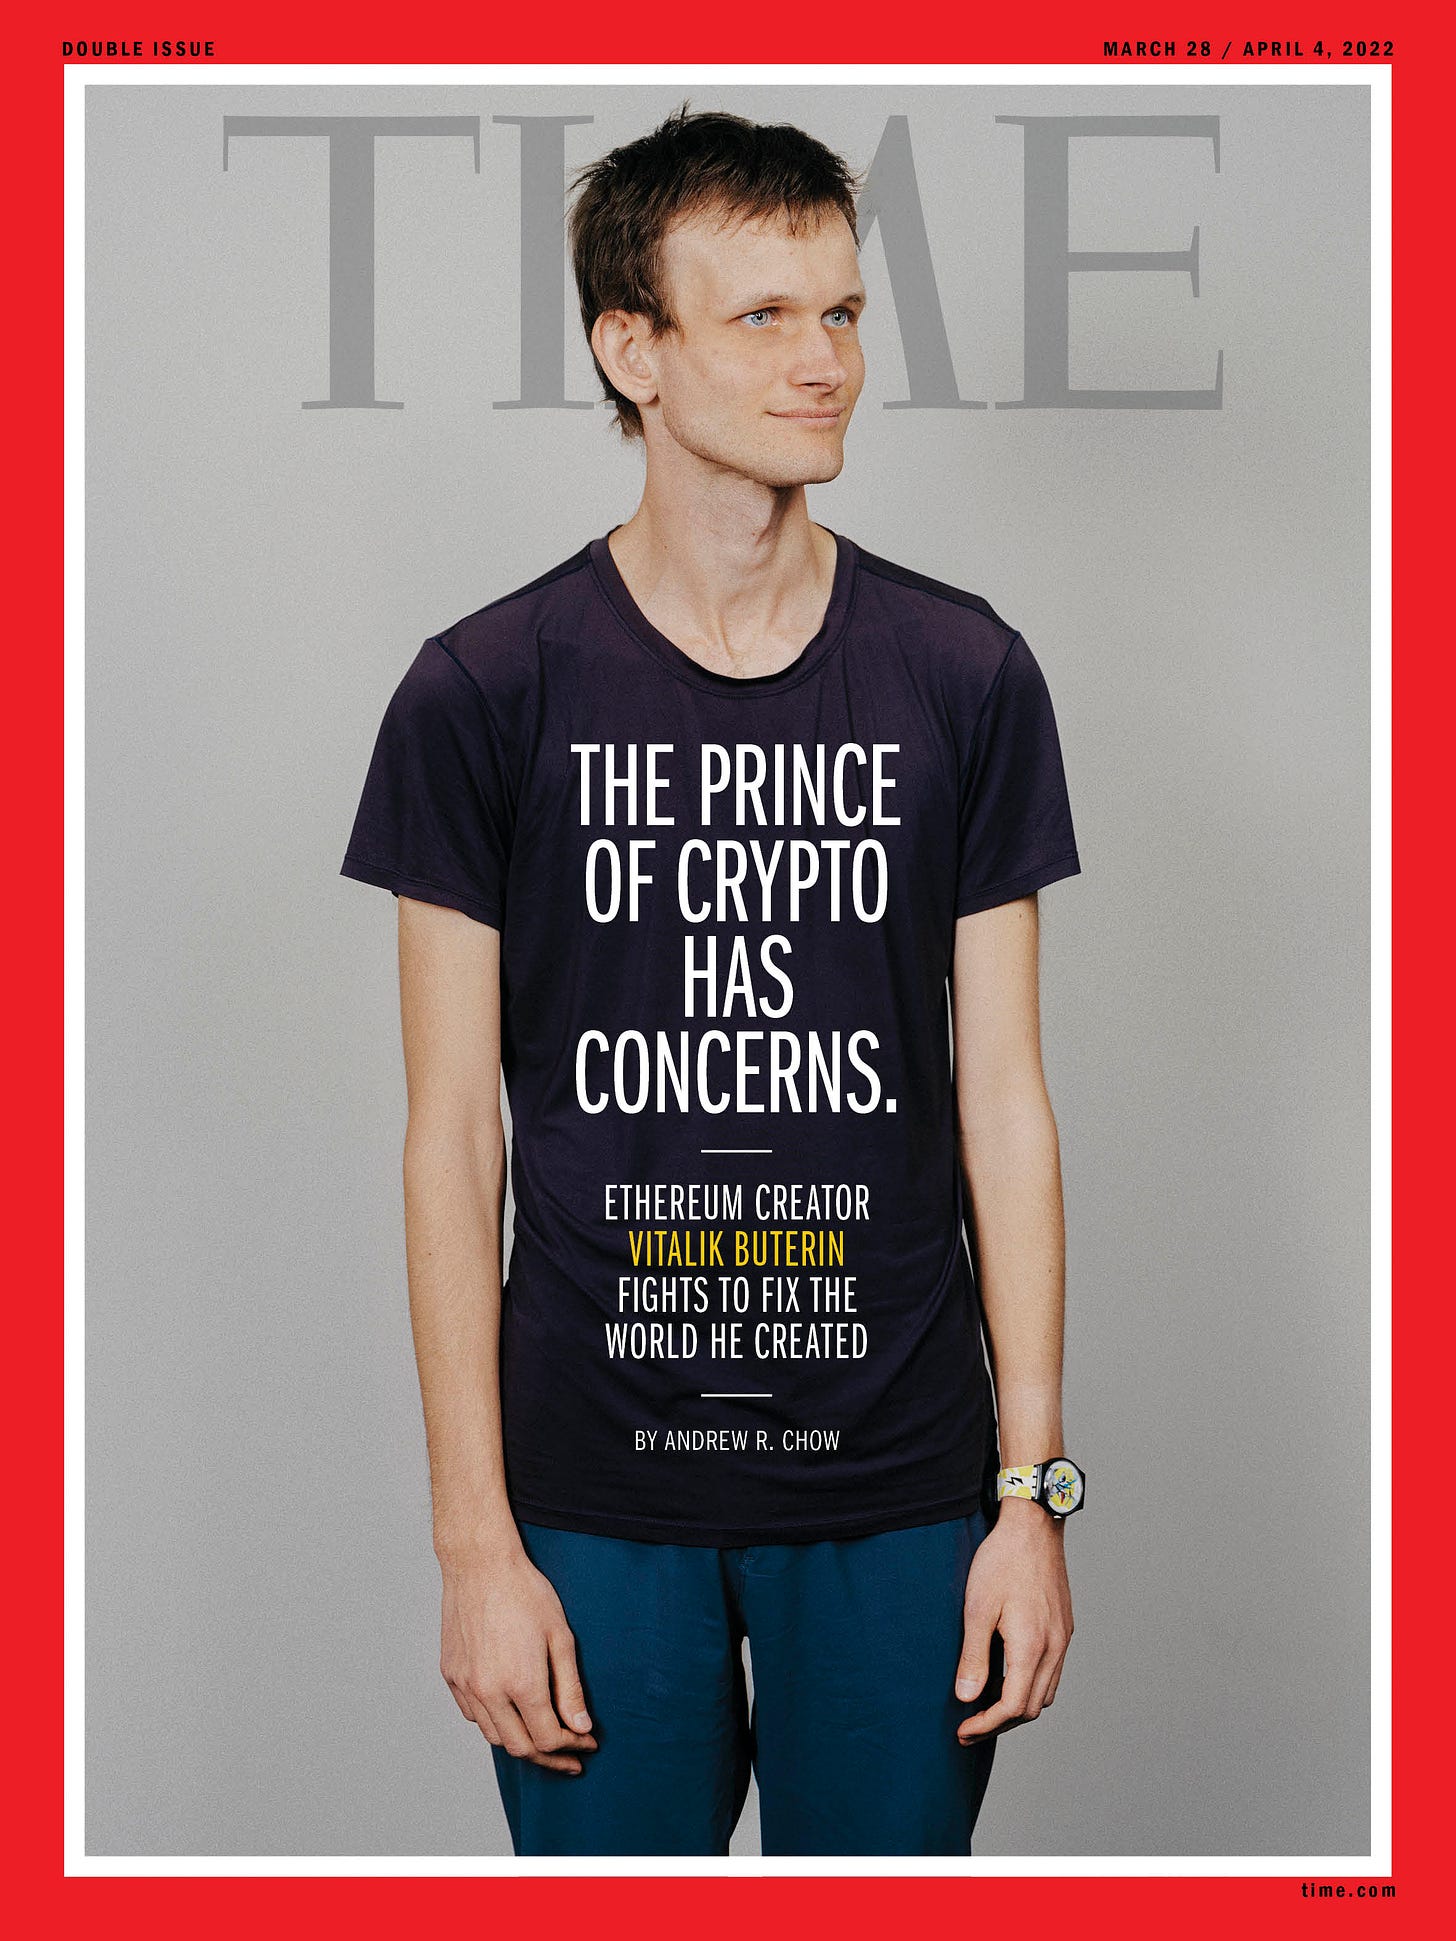 Ethereum's Vitalik Buterin Is Worried About Crypto's Future | Time